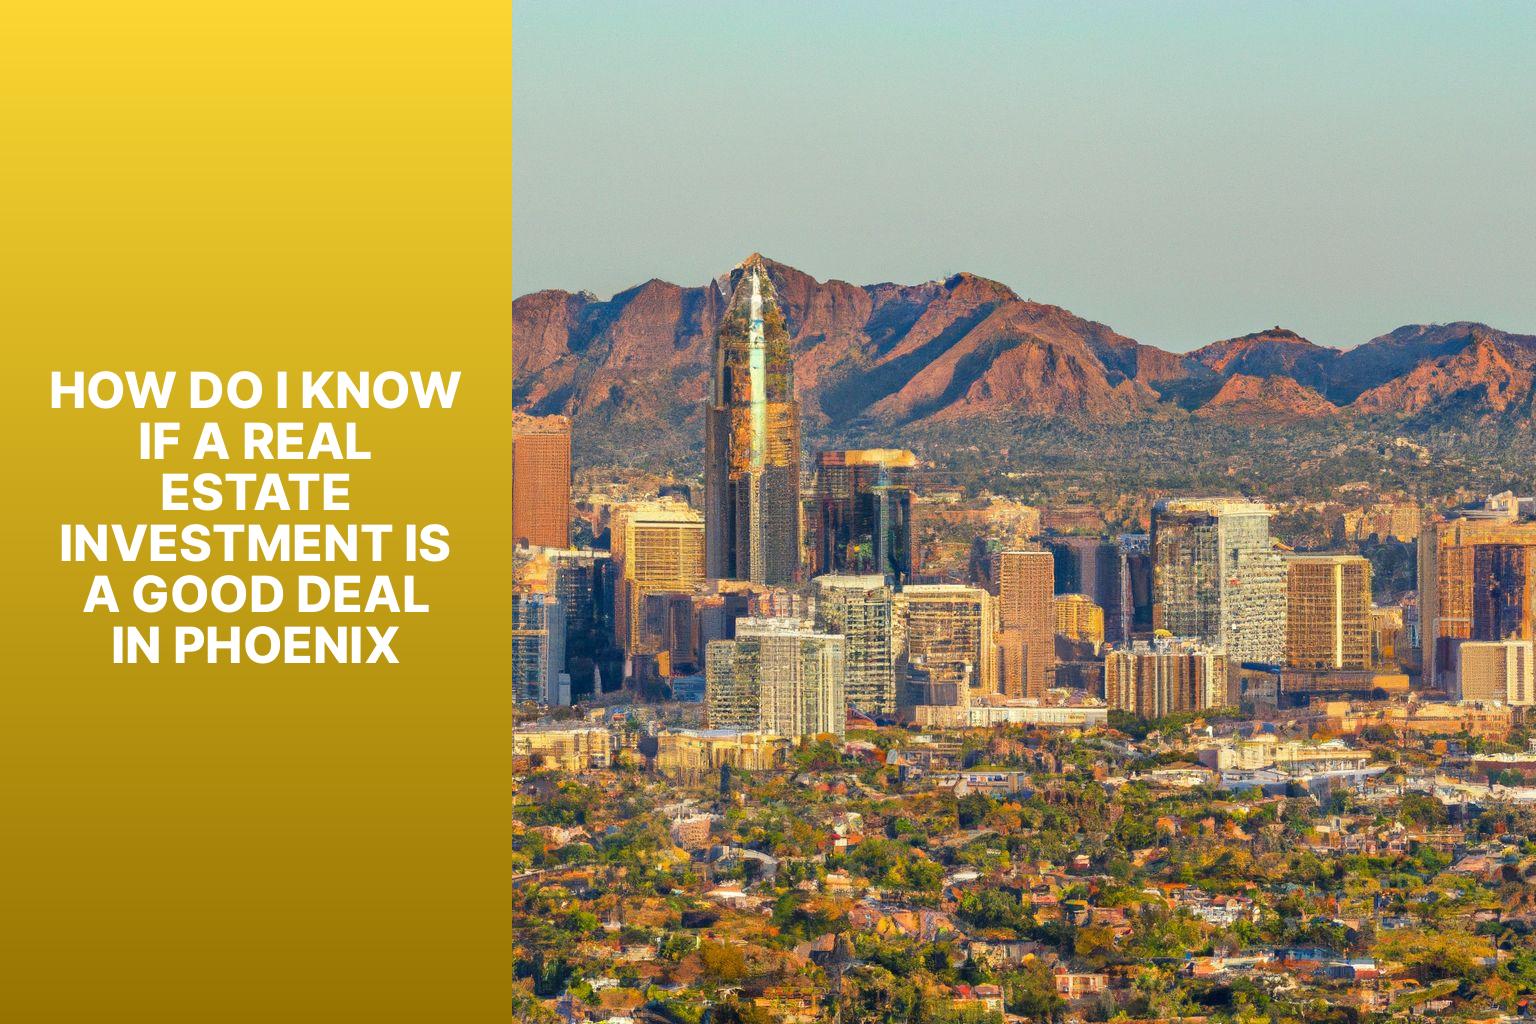 How do I know if a real estate investment is a good deal in Phoenix